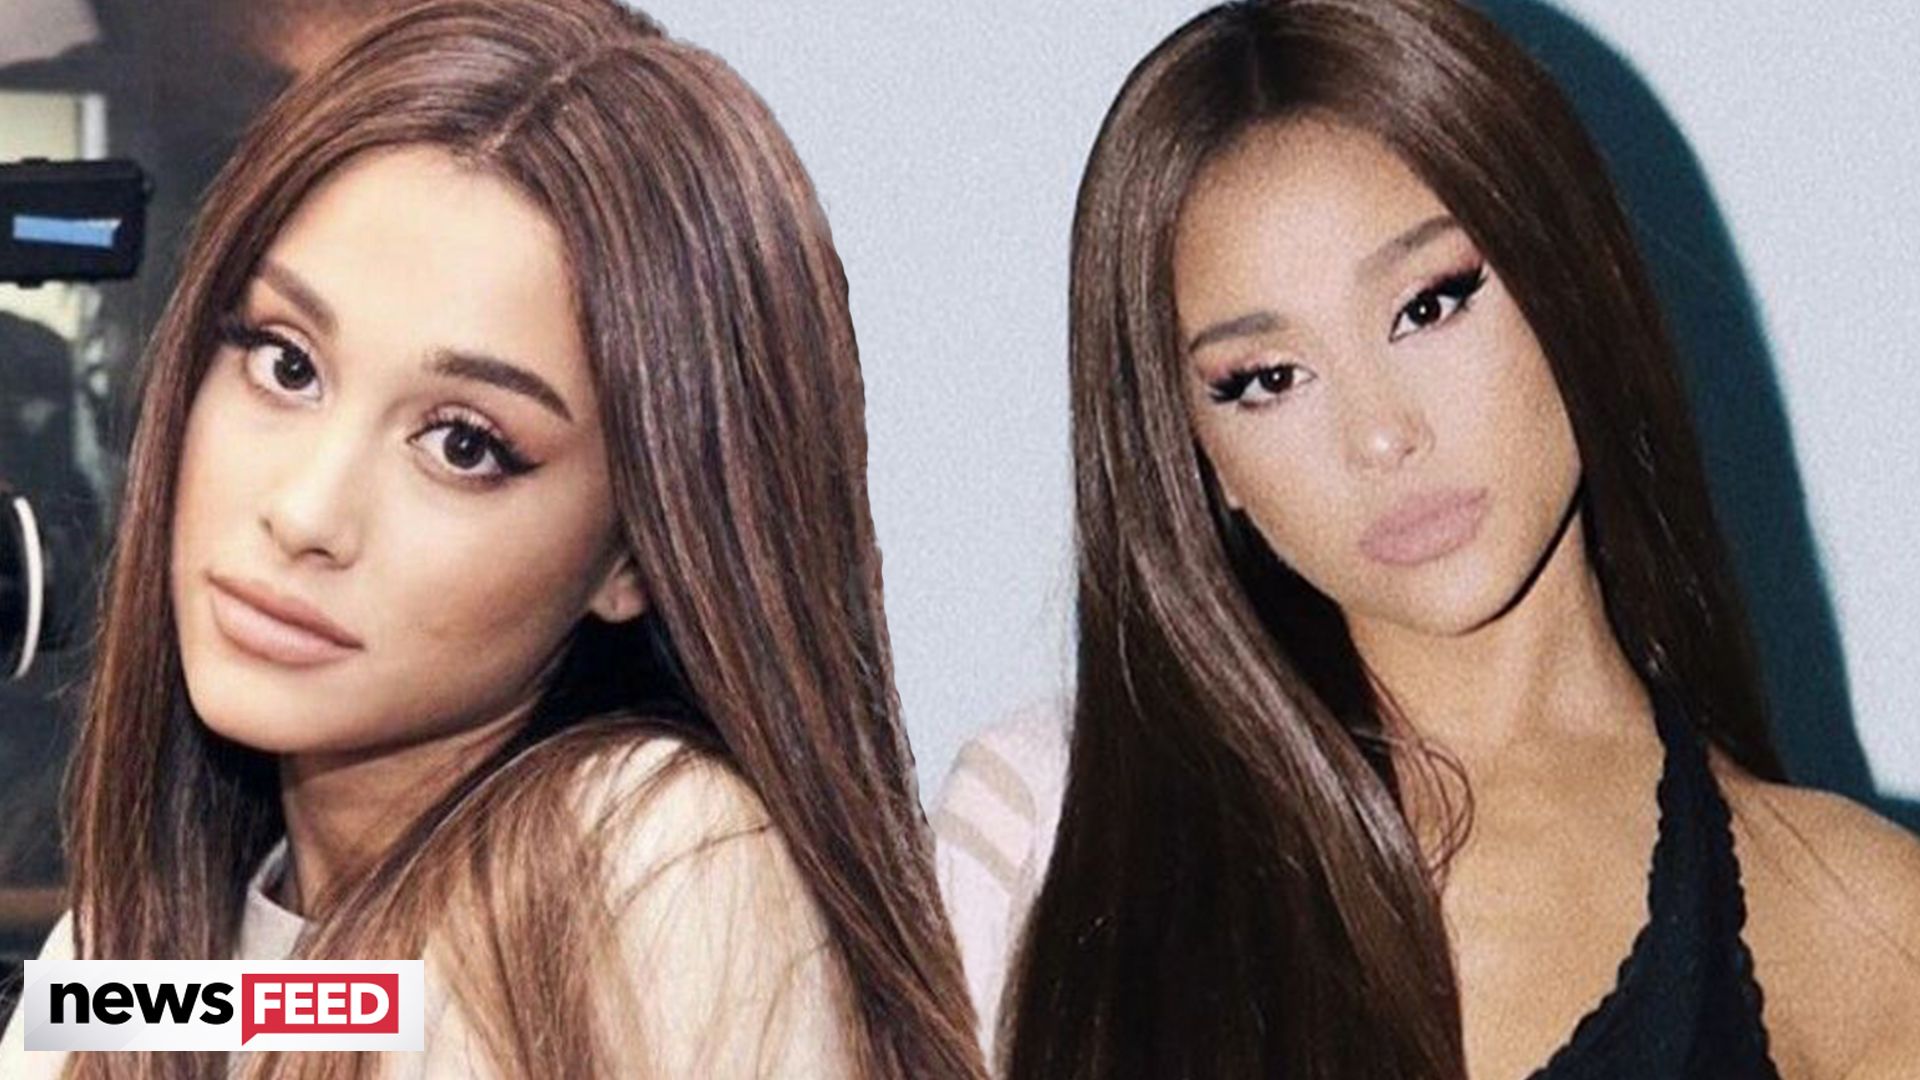 Ariana Grandes Hair Is Long and Curly She Reveals in New Video